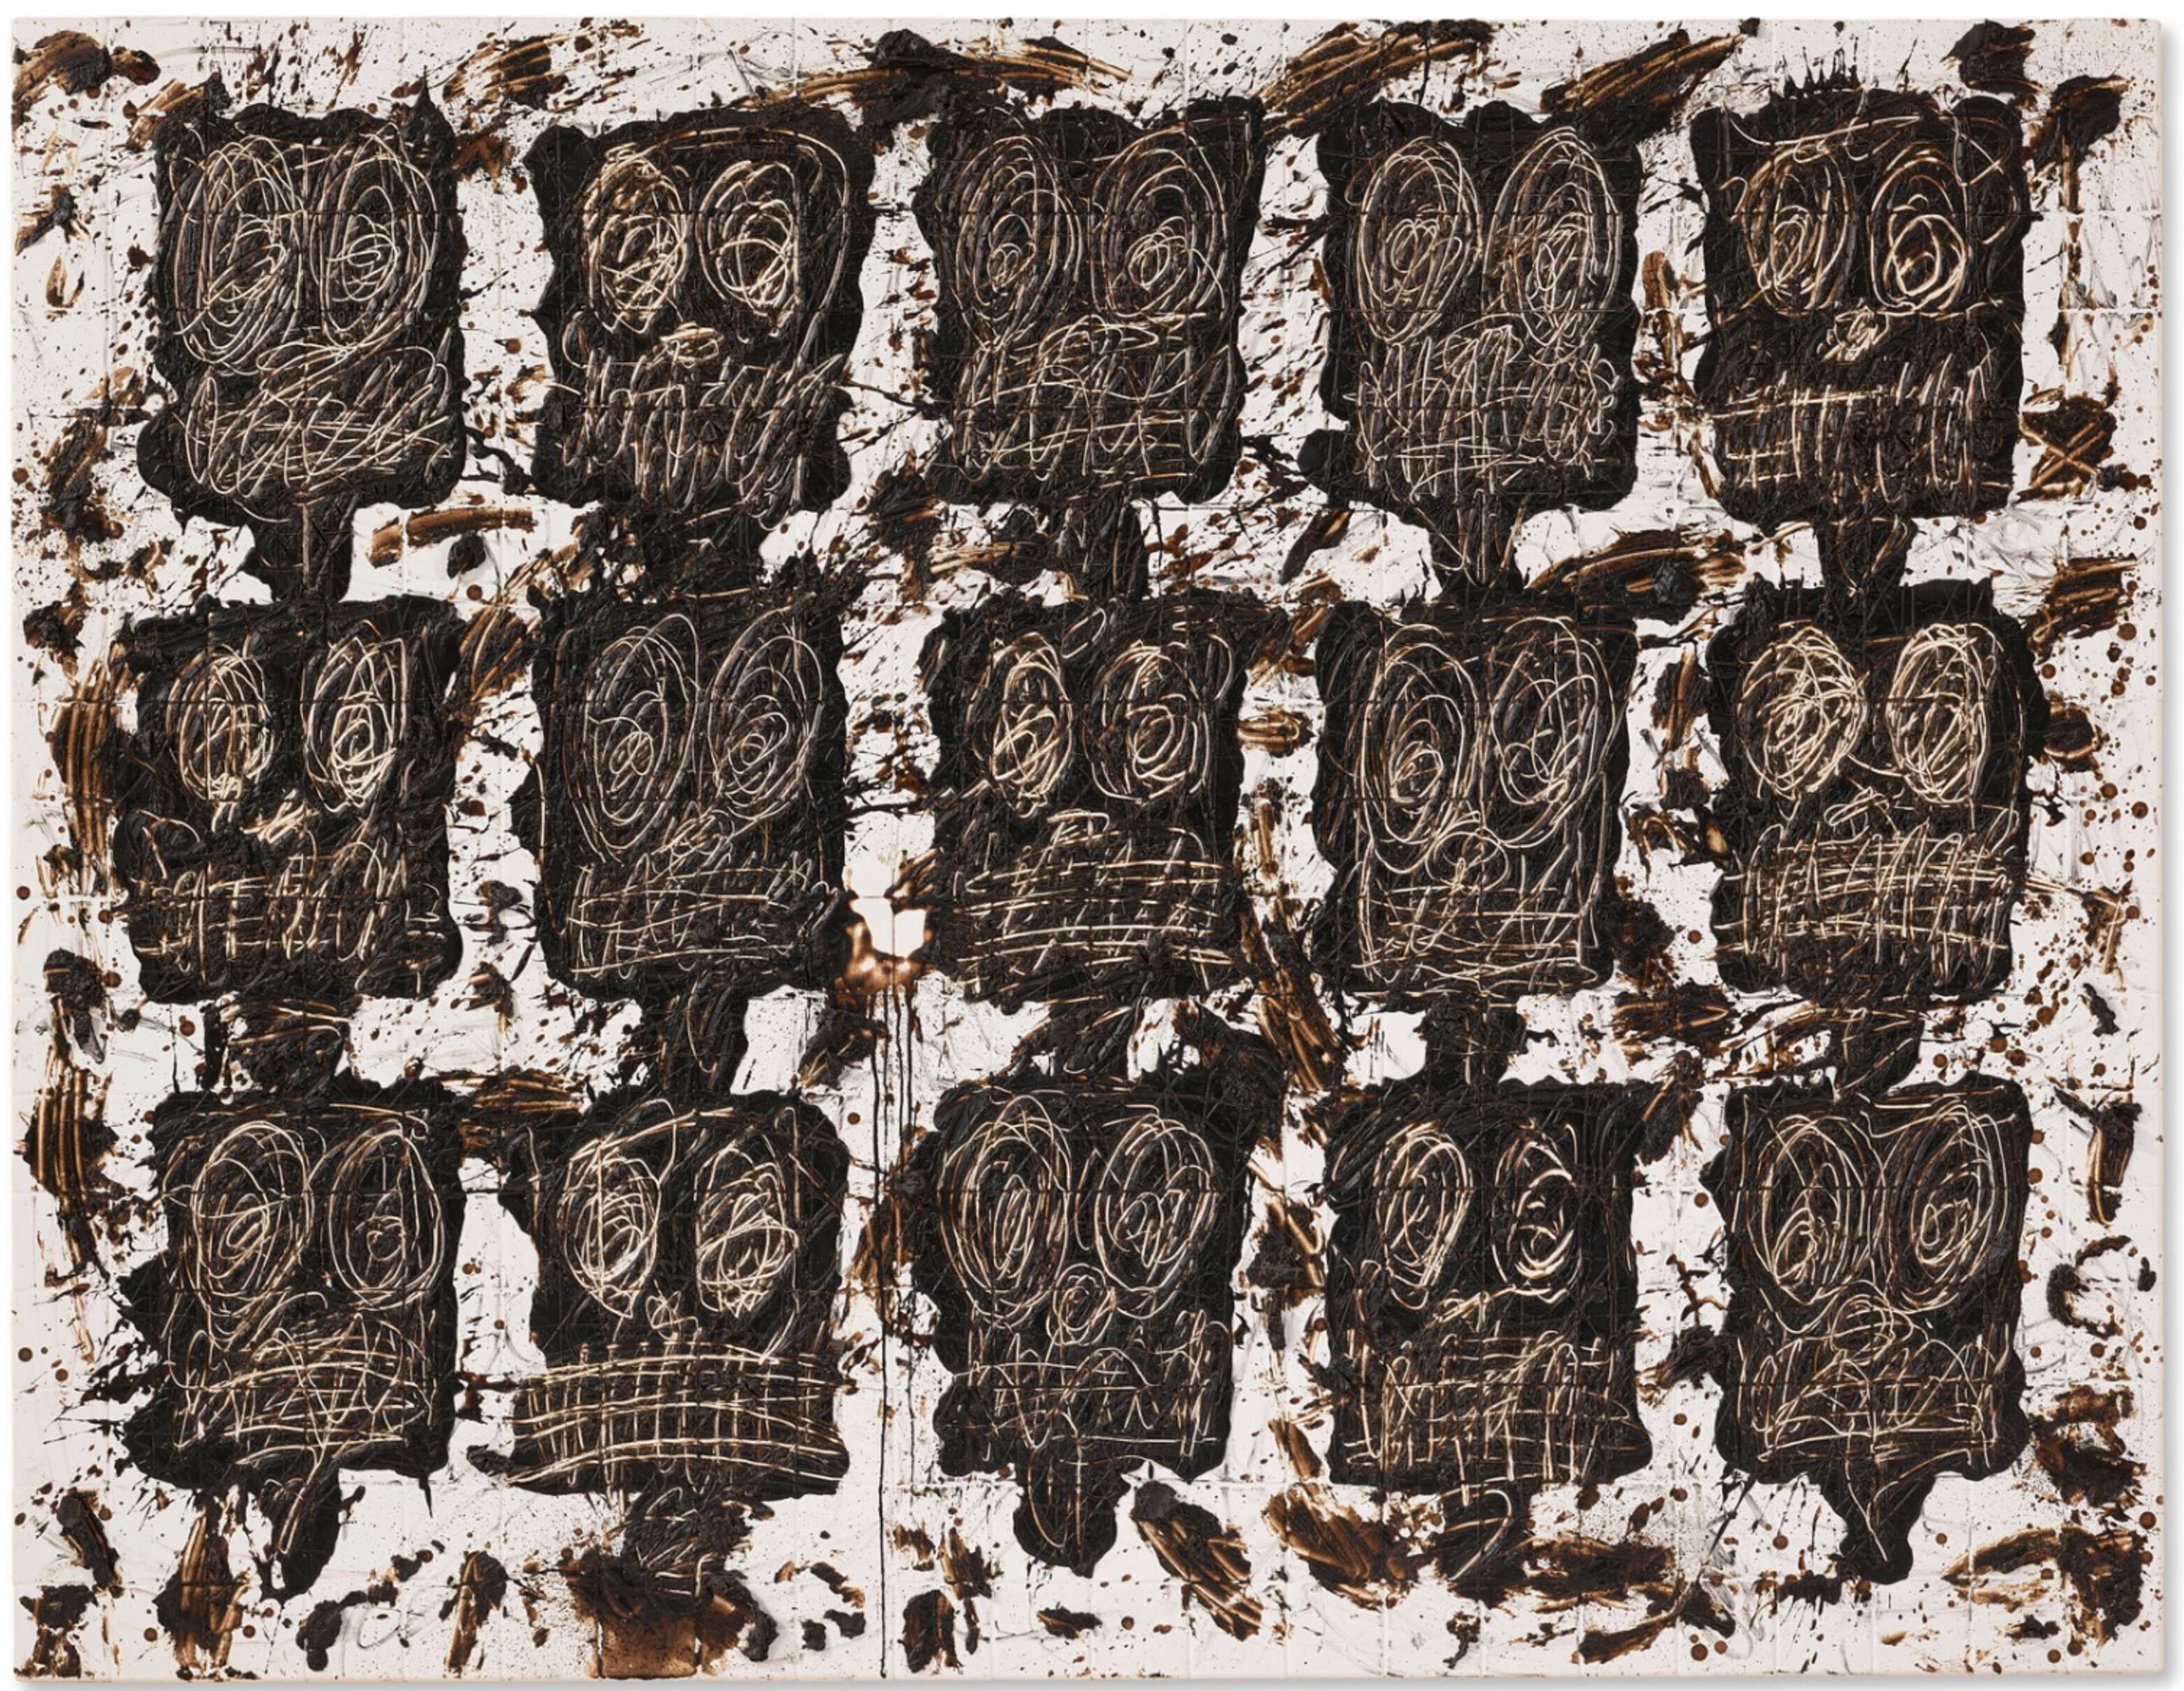 An artwork by Rashid Johnson presenting box-like faces formed from textured black soap and wax, with distinct scribbled features including eyes and expressive, abstracted grimaces. The faces are arranged in a grid-like pattern, consisting of five columns and three rows. They are set against a white canvas that bears splatters of the black soap and wax.